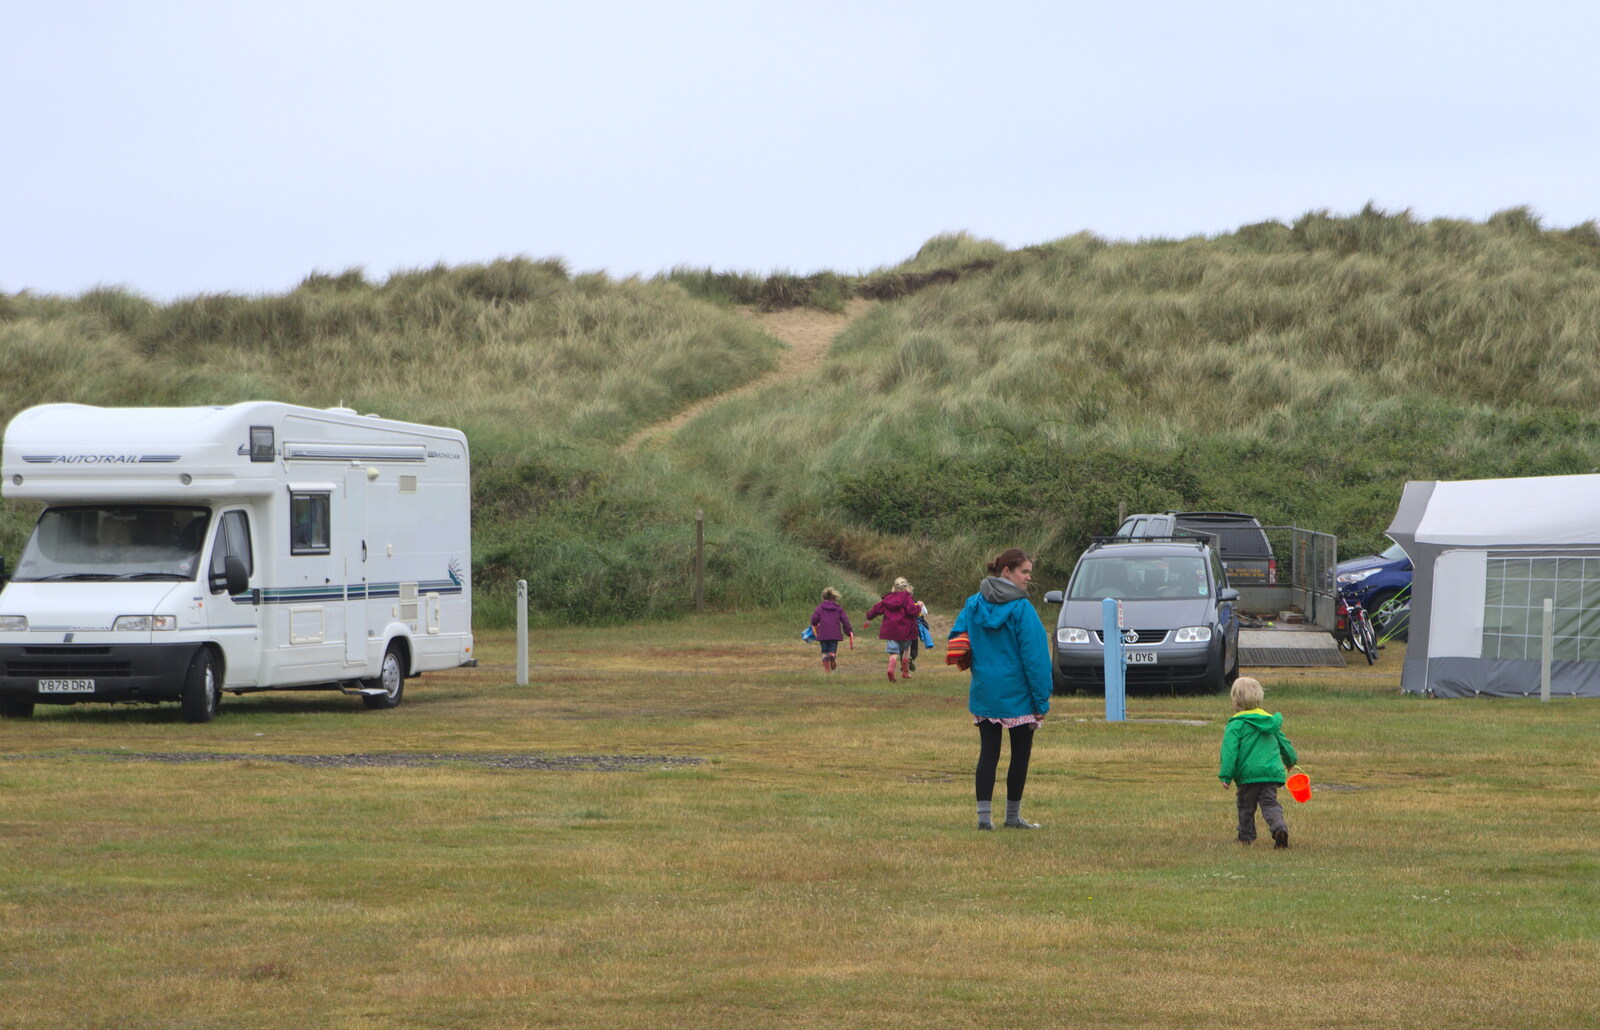 We head off to the beach from A Wet Weekend of Camping, Waxham Sands, Norfolk - 13th June 2015